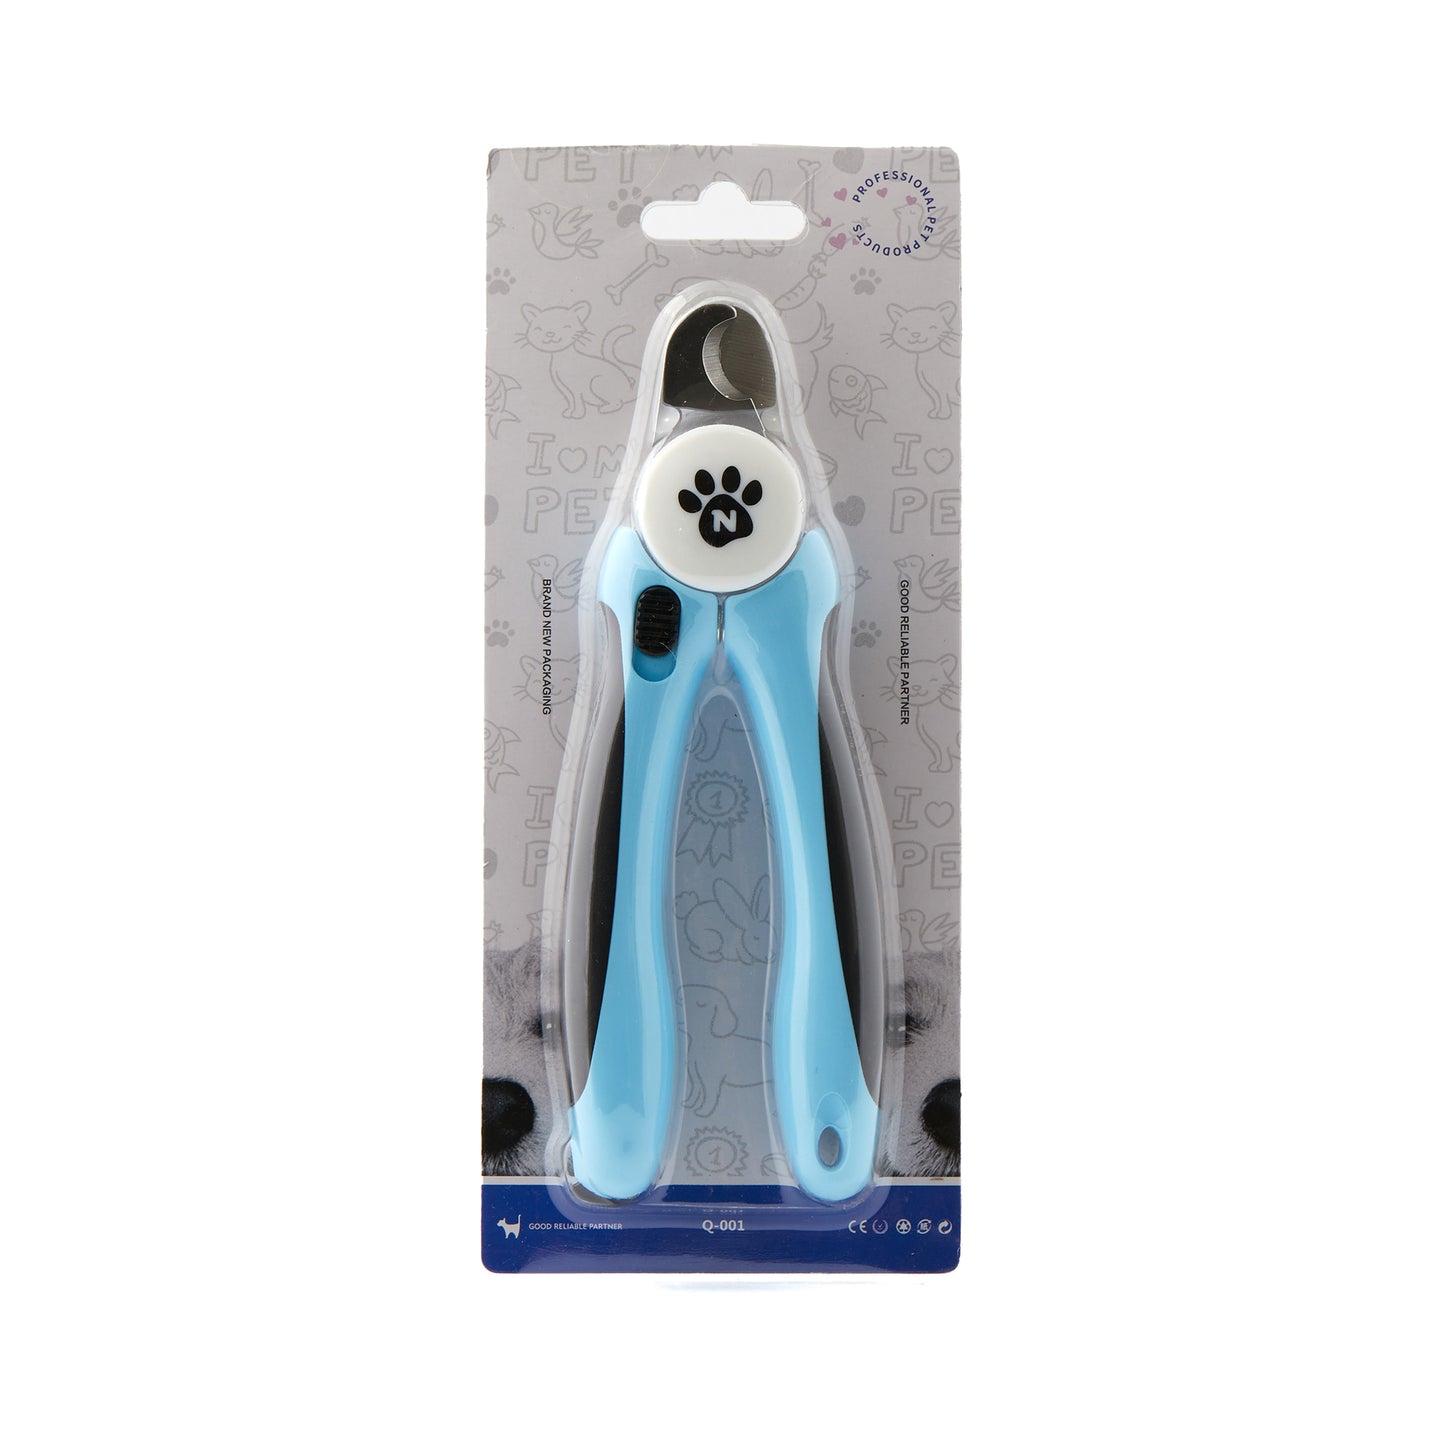 Precision Nail Trimmer | Effortlessly Trim Your Pet's Nails with Ease